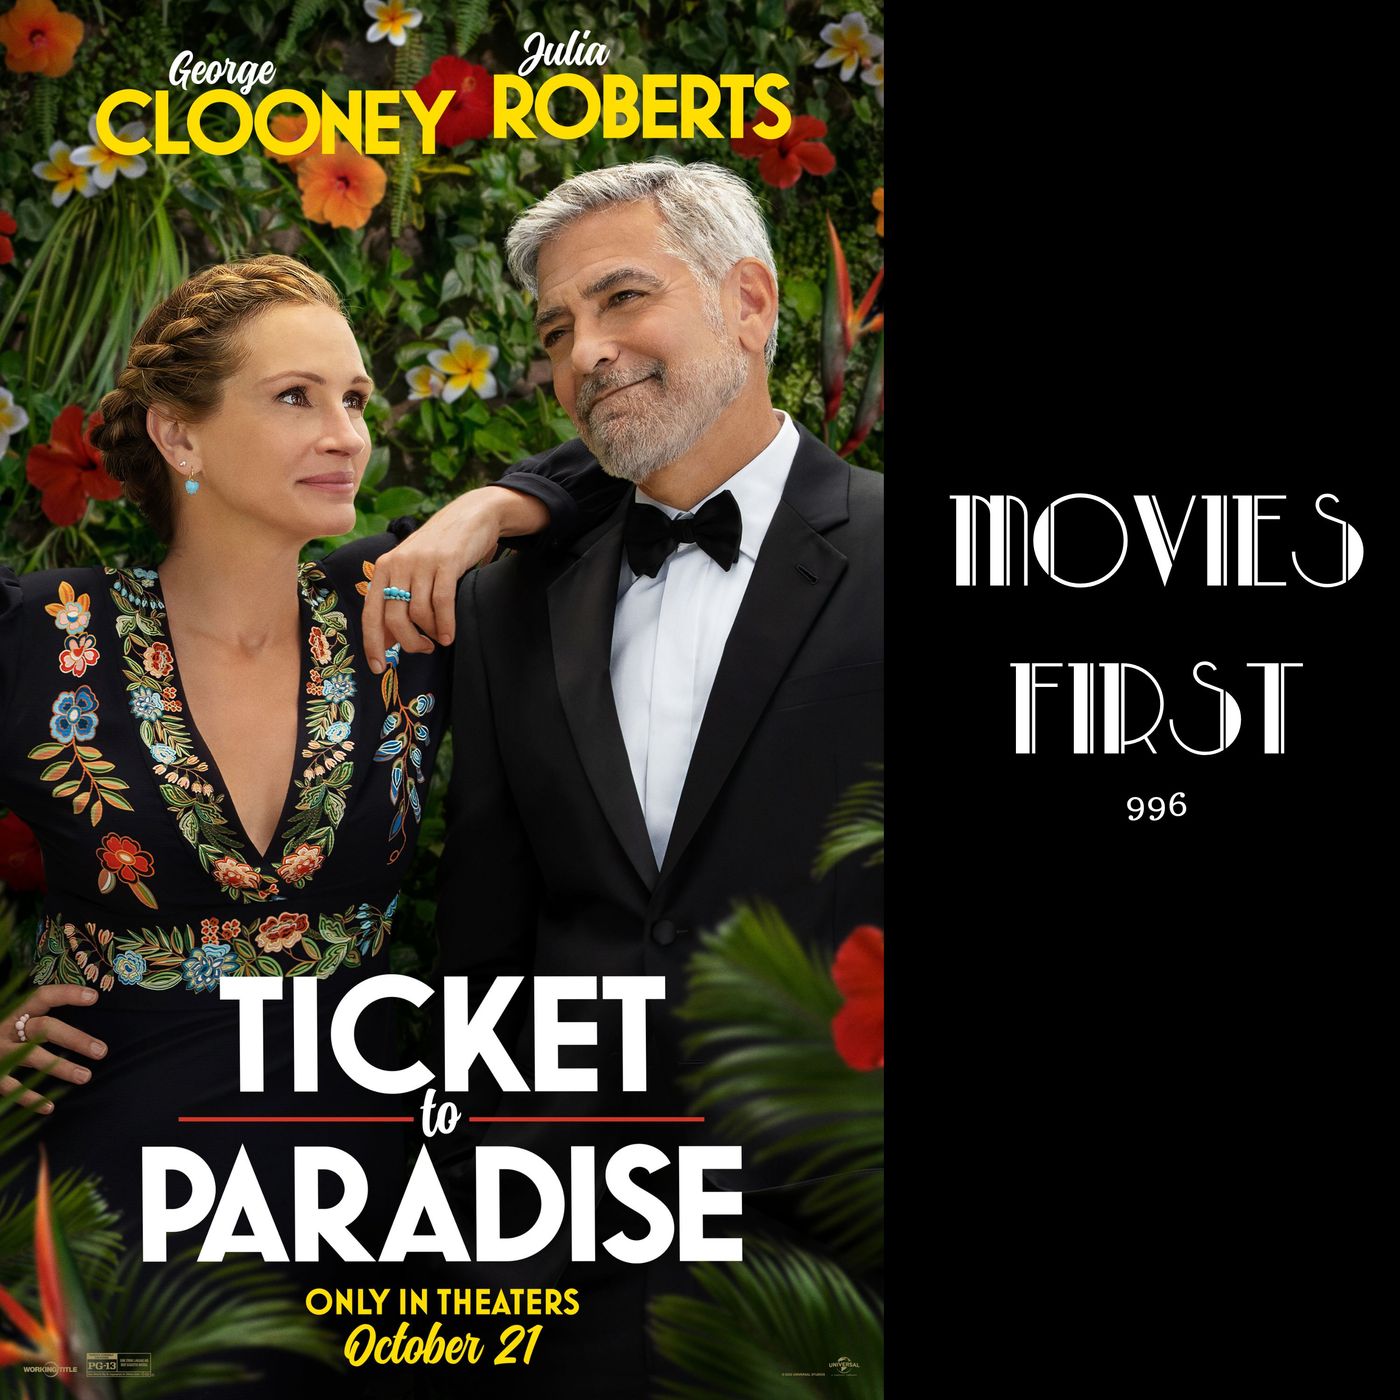 Ticket To Paradise (Comedy, Romance) (review)